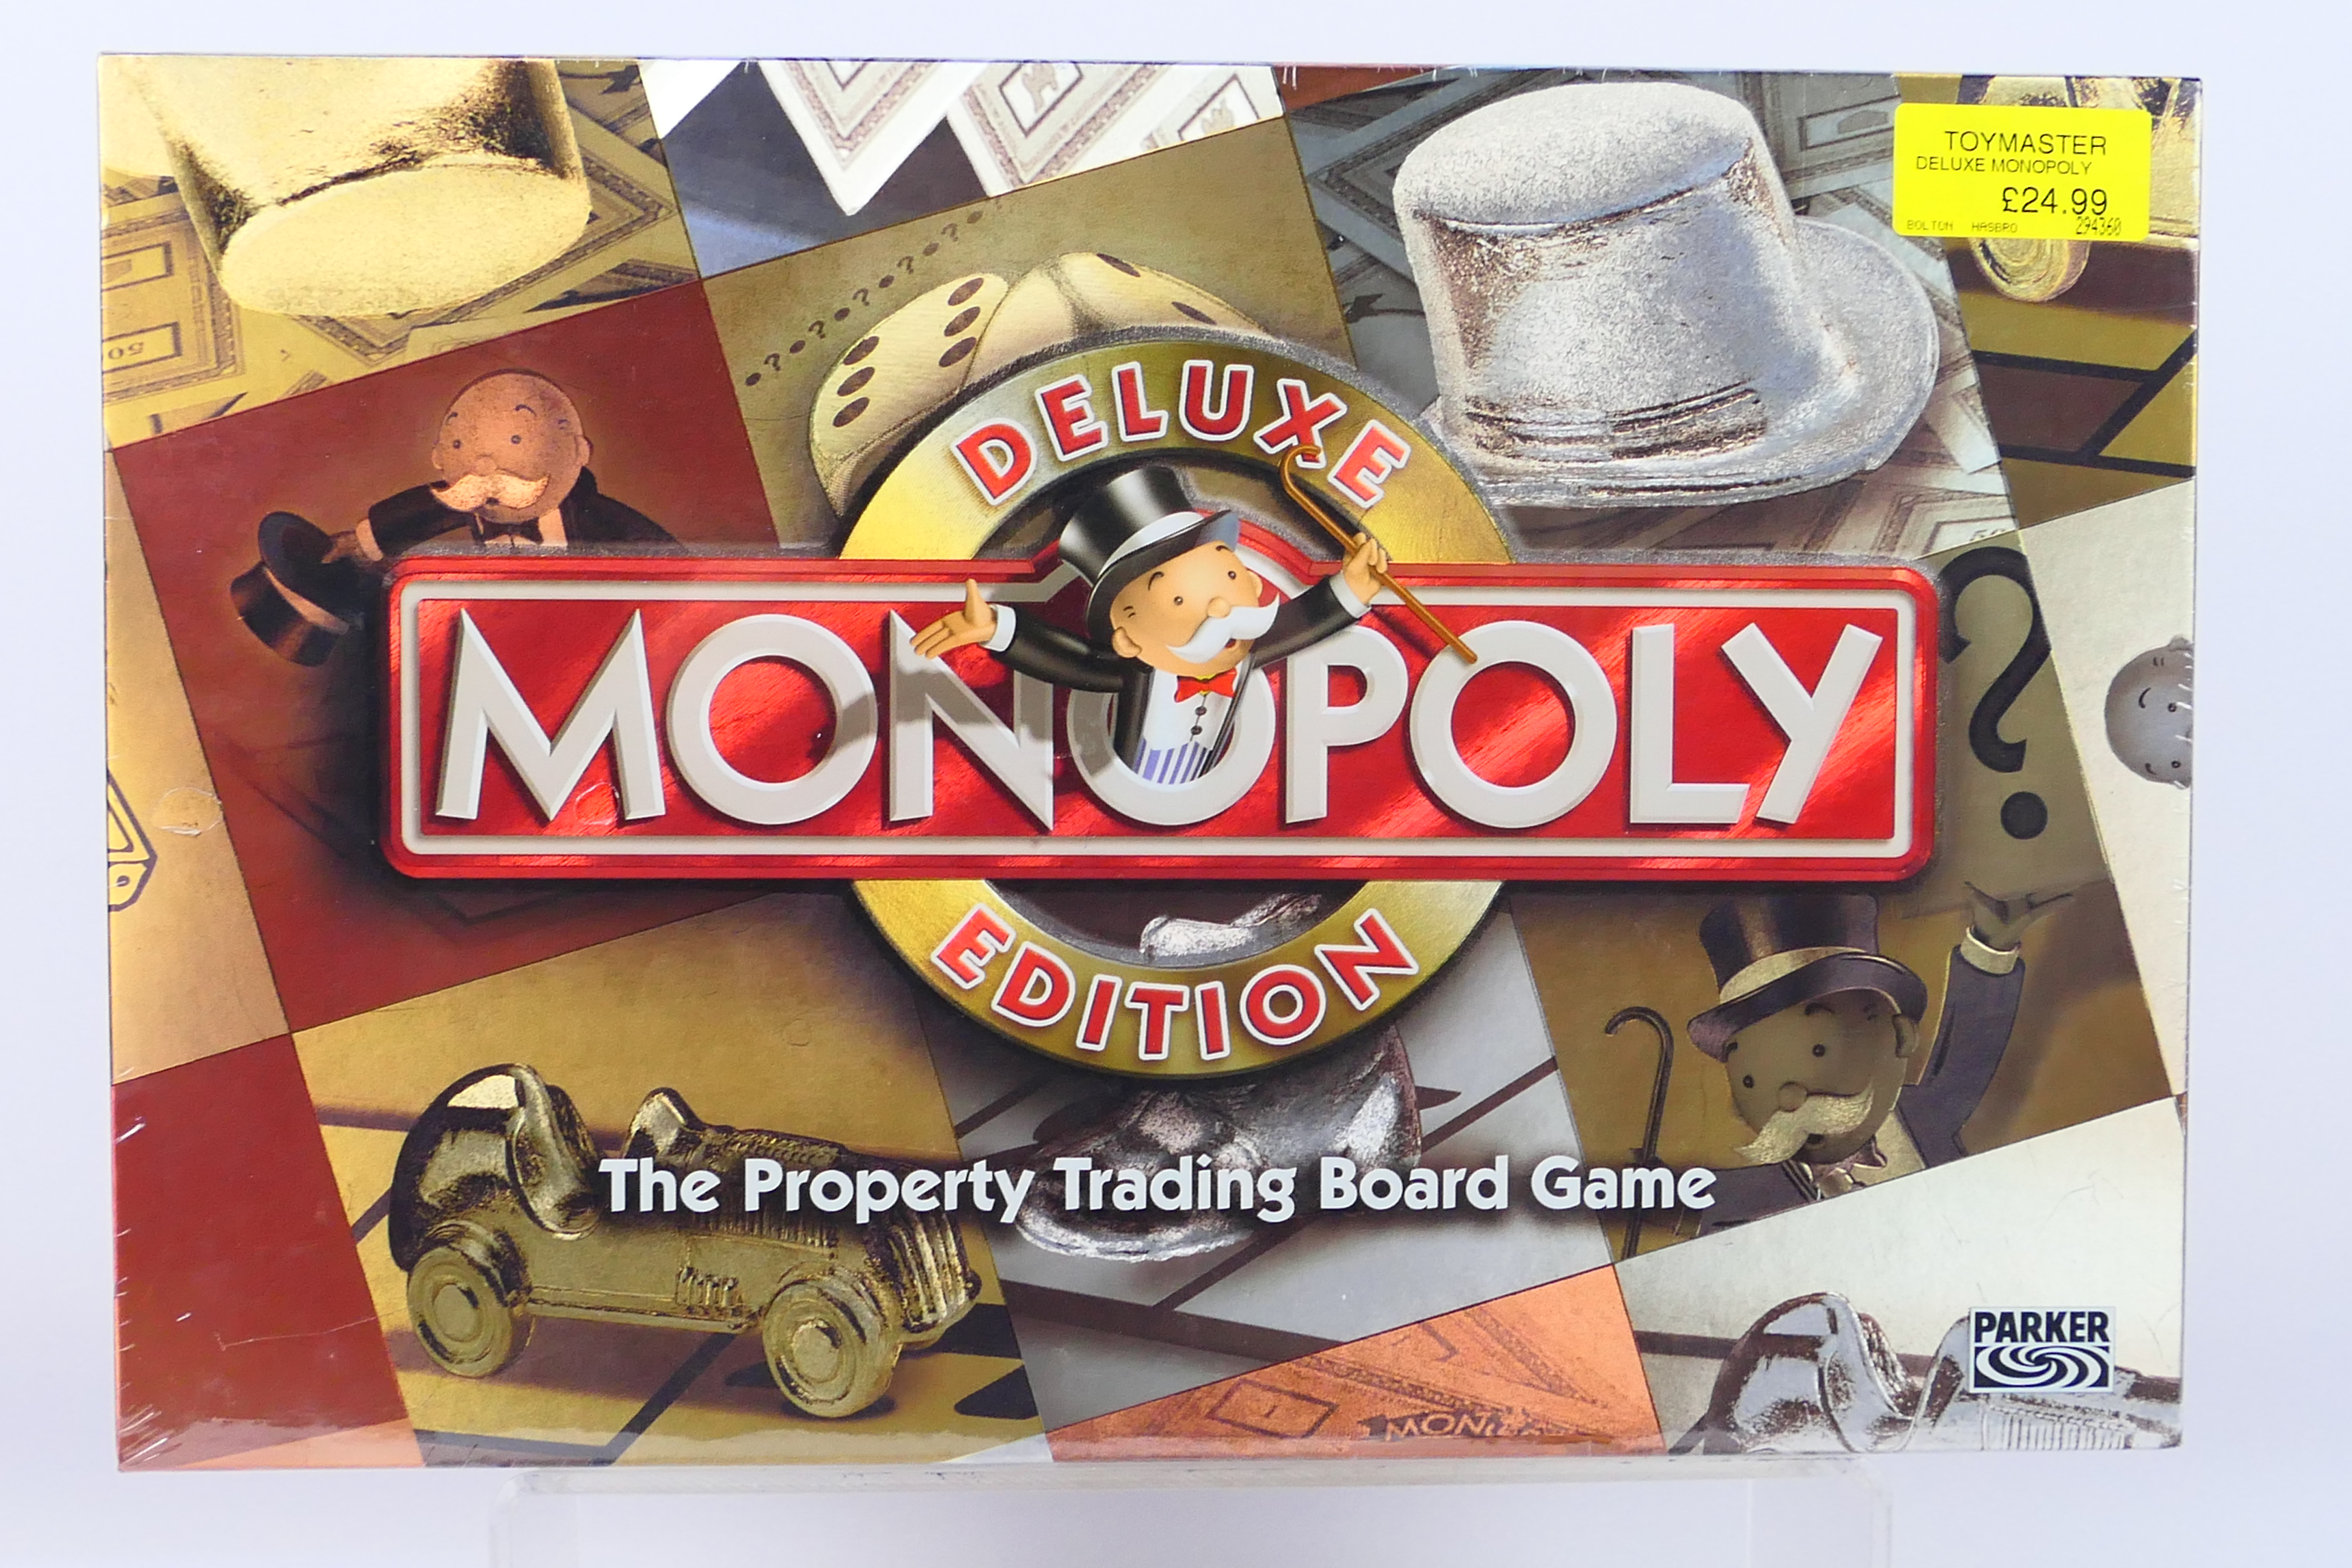 Hasbro - Parker - Monopoly - An unopened